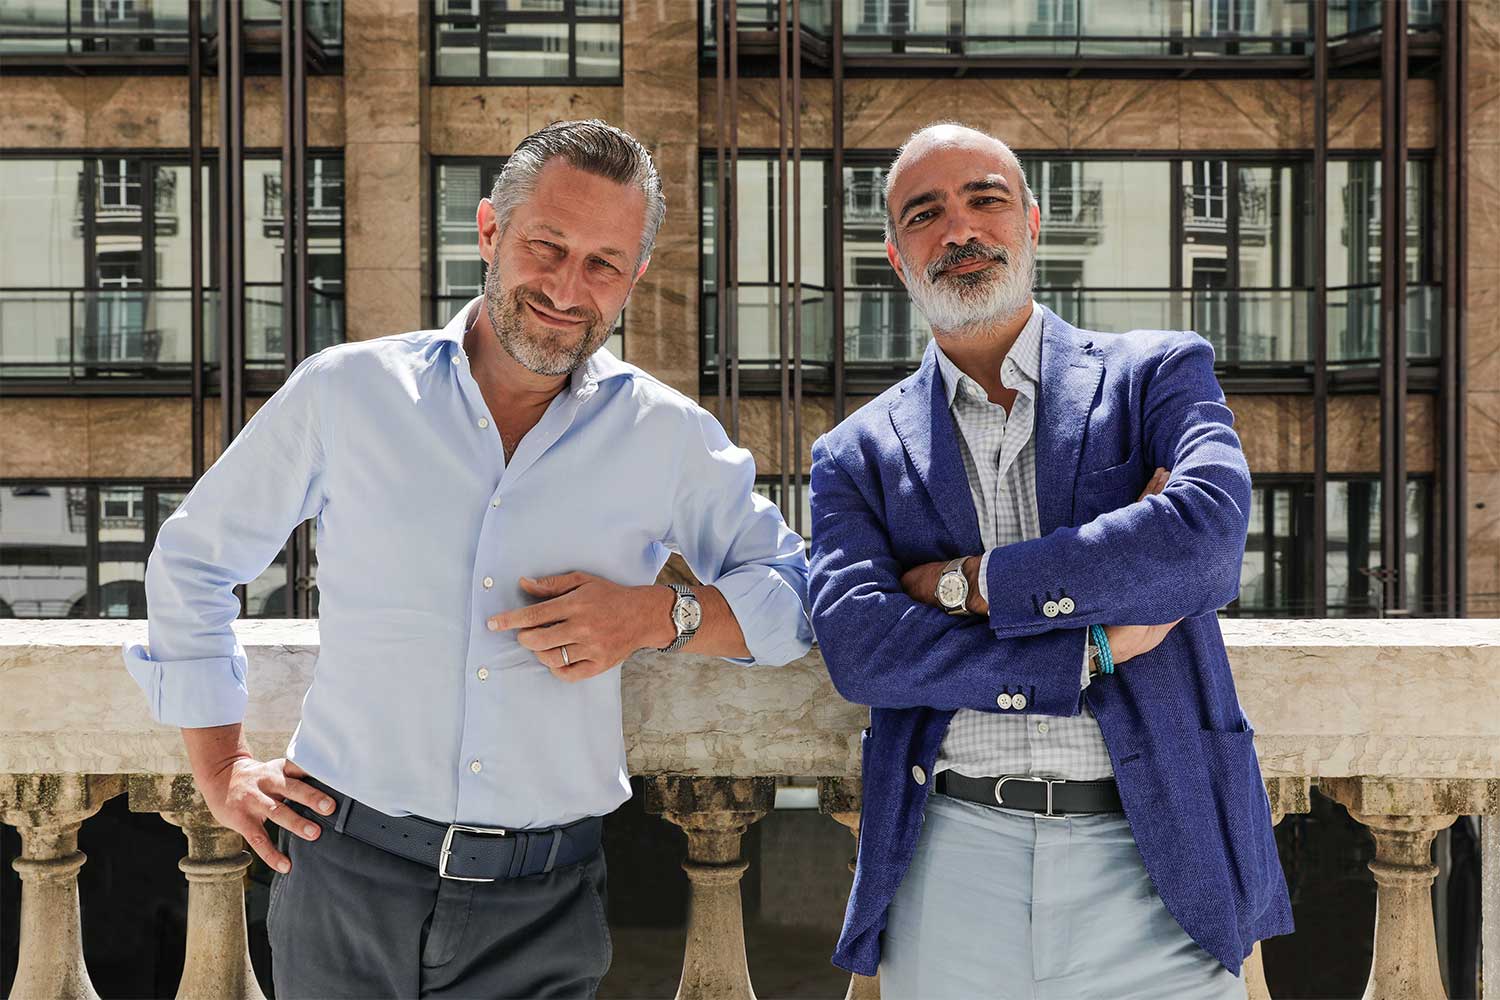 Aurel Bacs, Senior Consultant and Geneva's Head Of Sale, Alex Ghotbi of Phillips Watches sporting their special LAURENT FERRIER Micro-Rotor watches (Image: Phillips Watches)